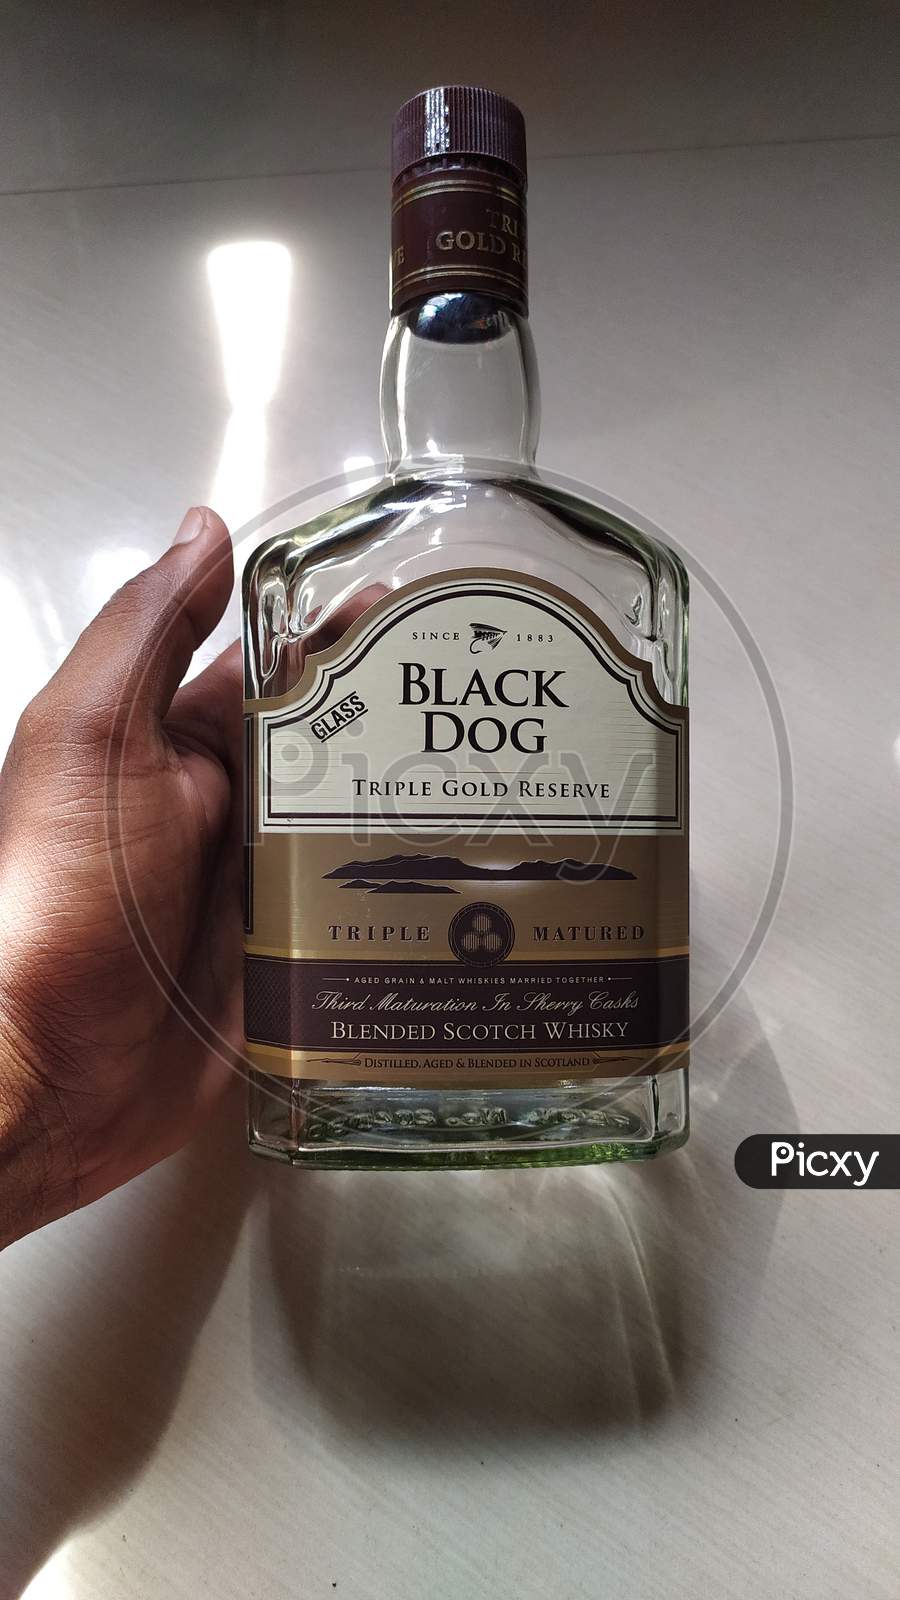 what is black dog drink